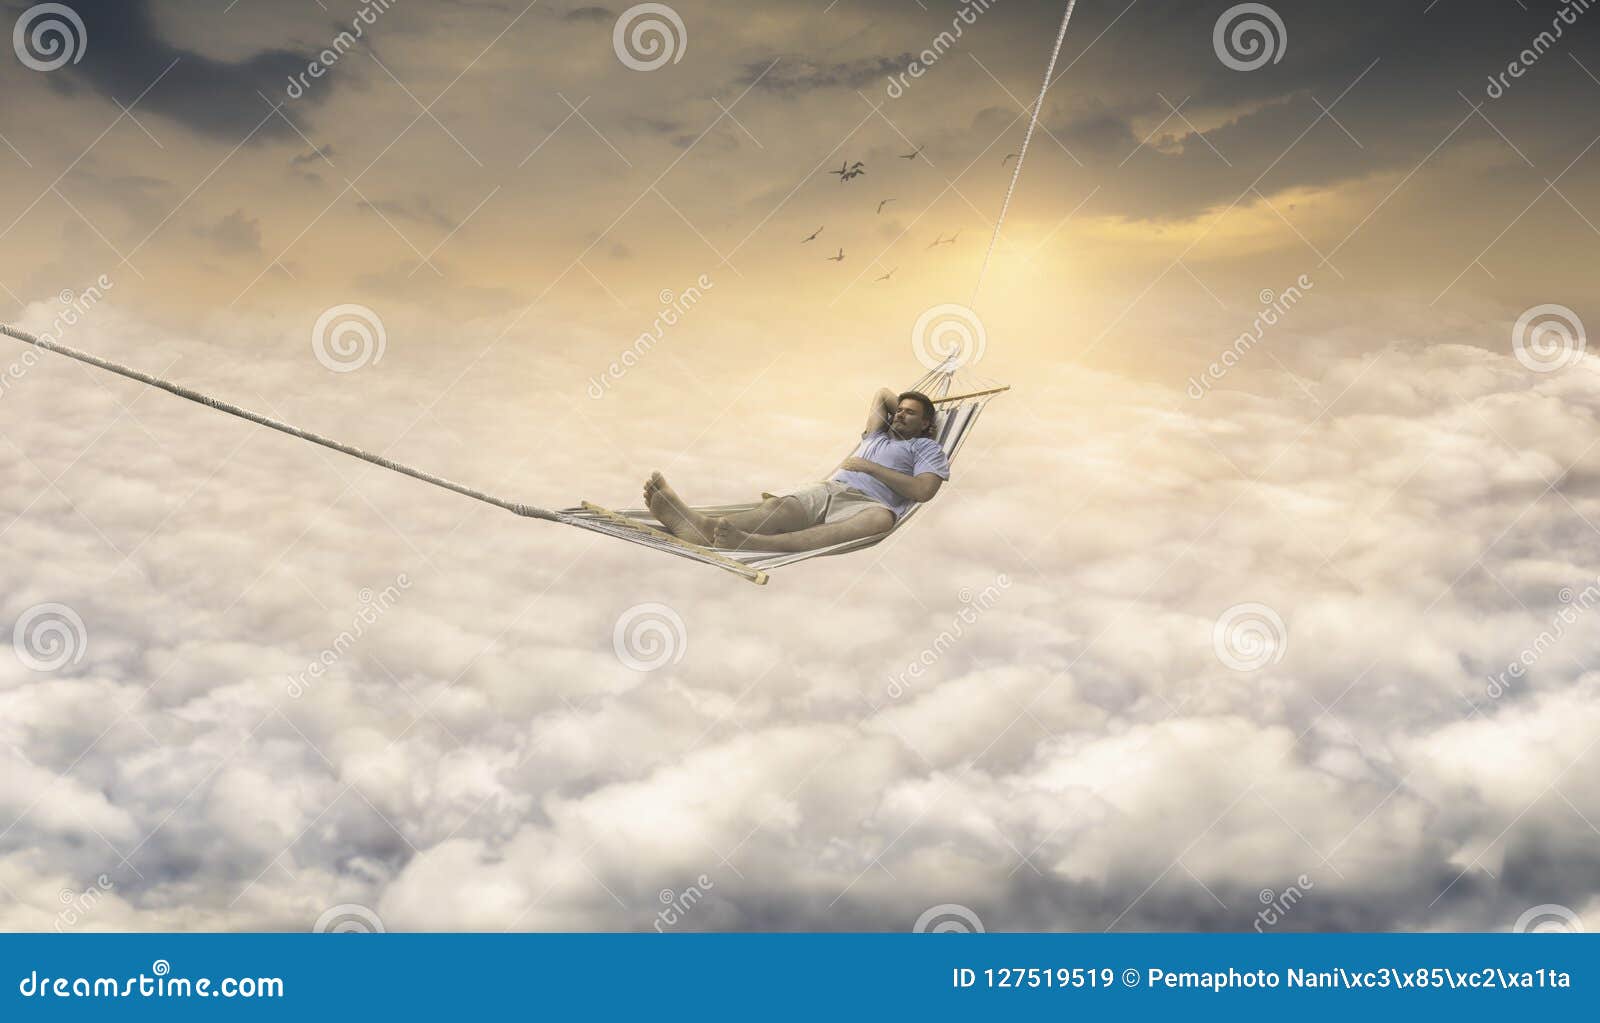 man dreaming in rocking net above sky